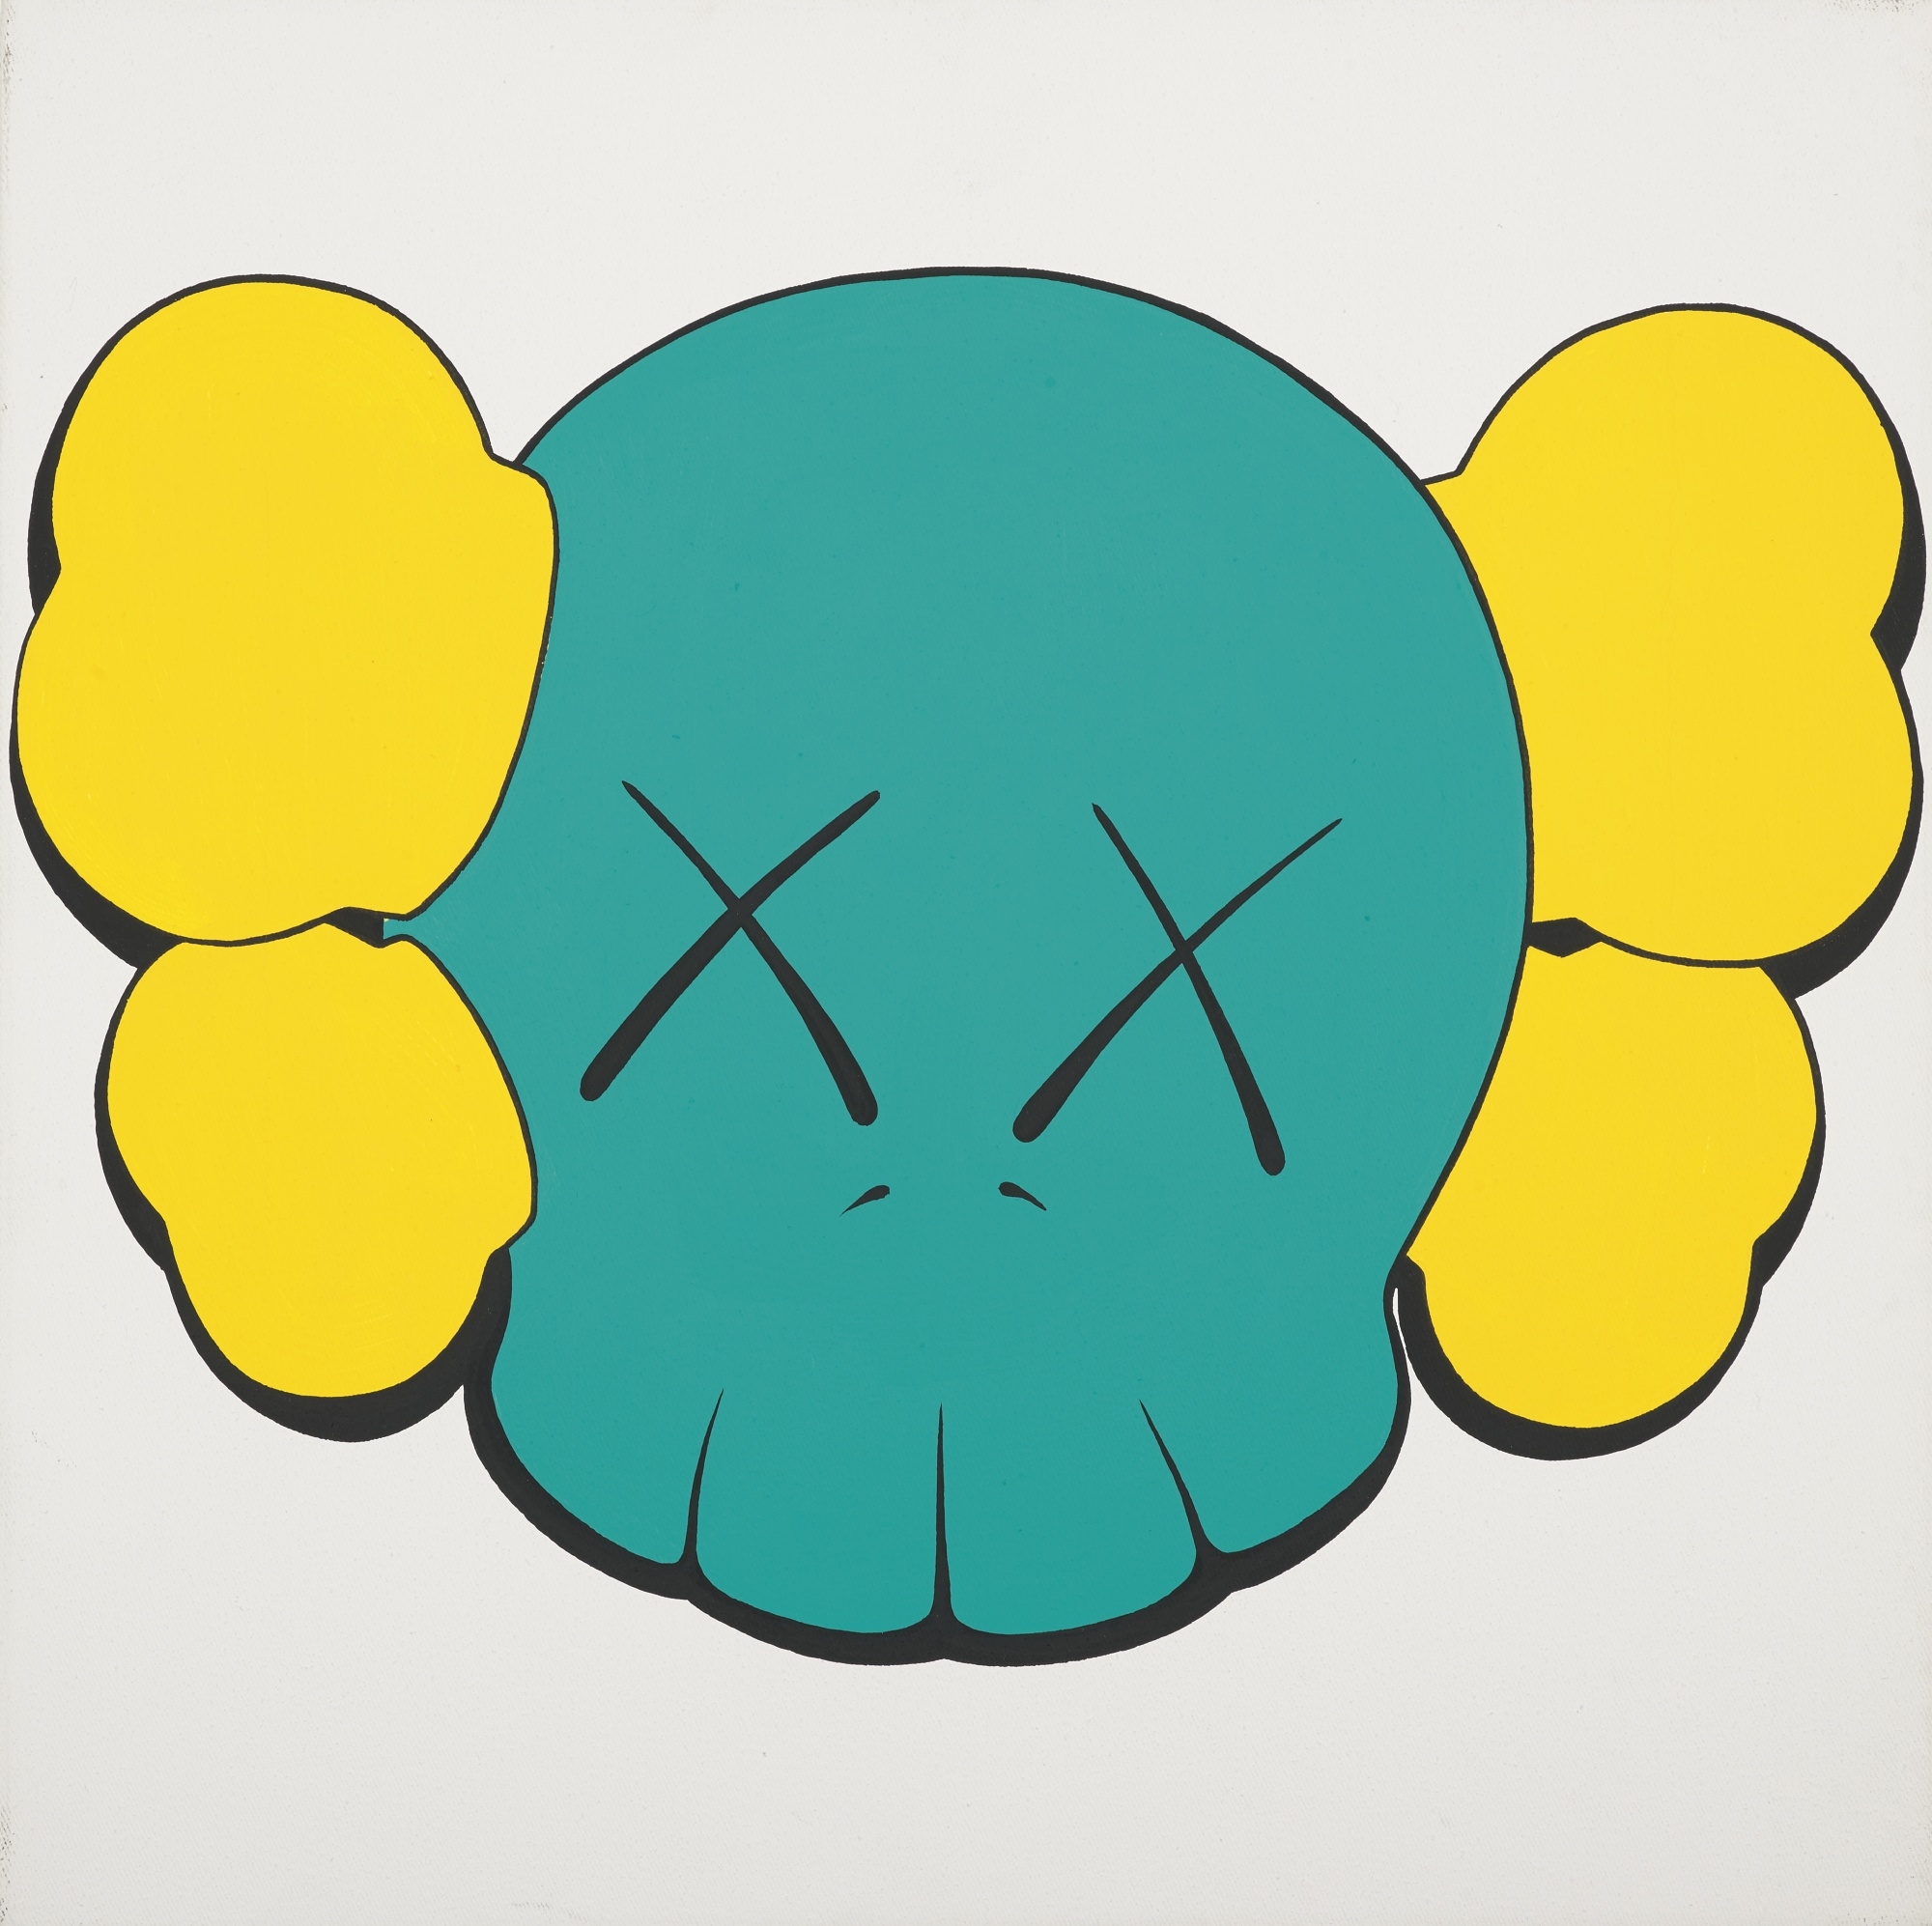 UNTITLED by KAWS, 2000